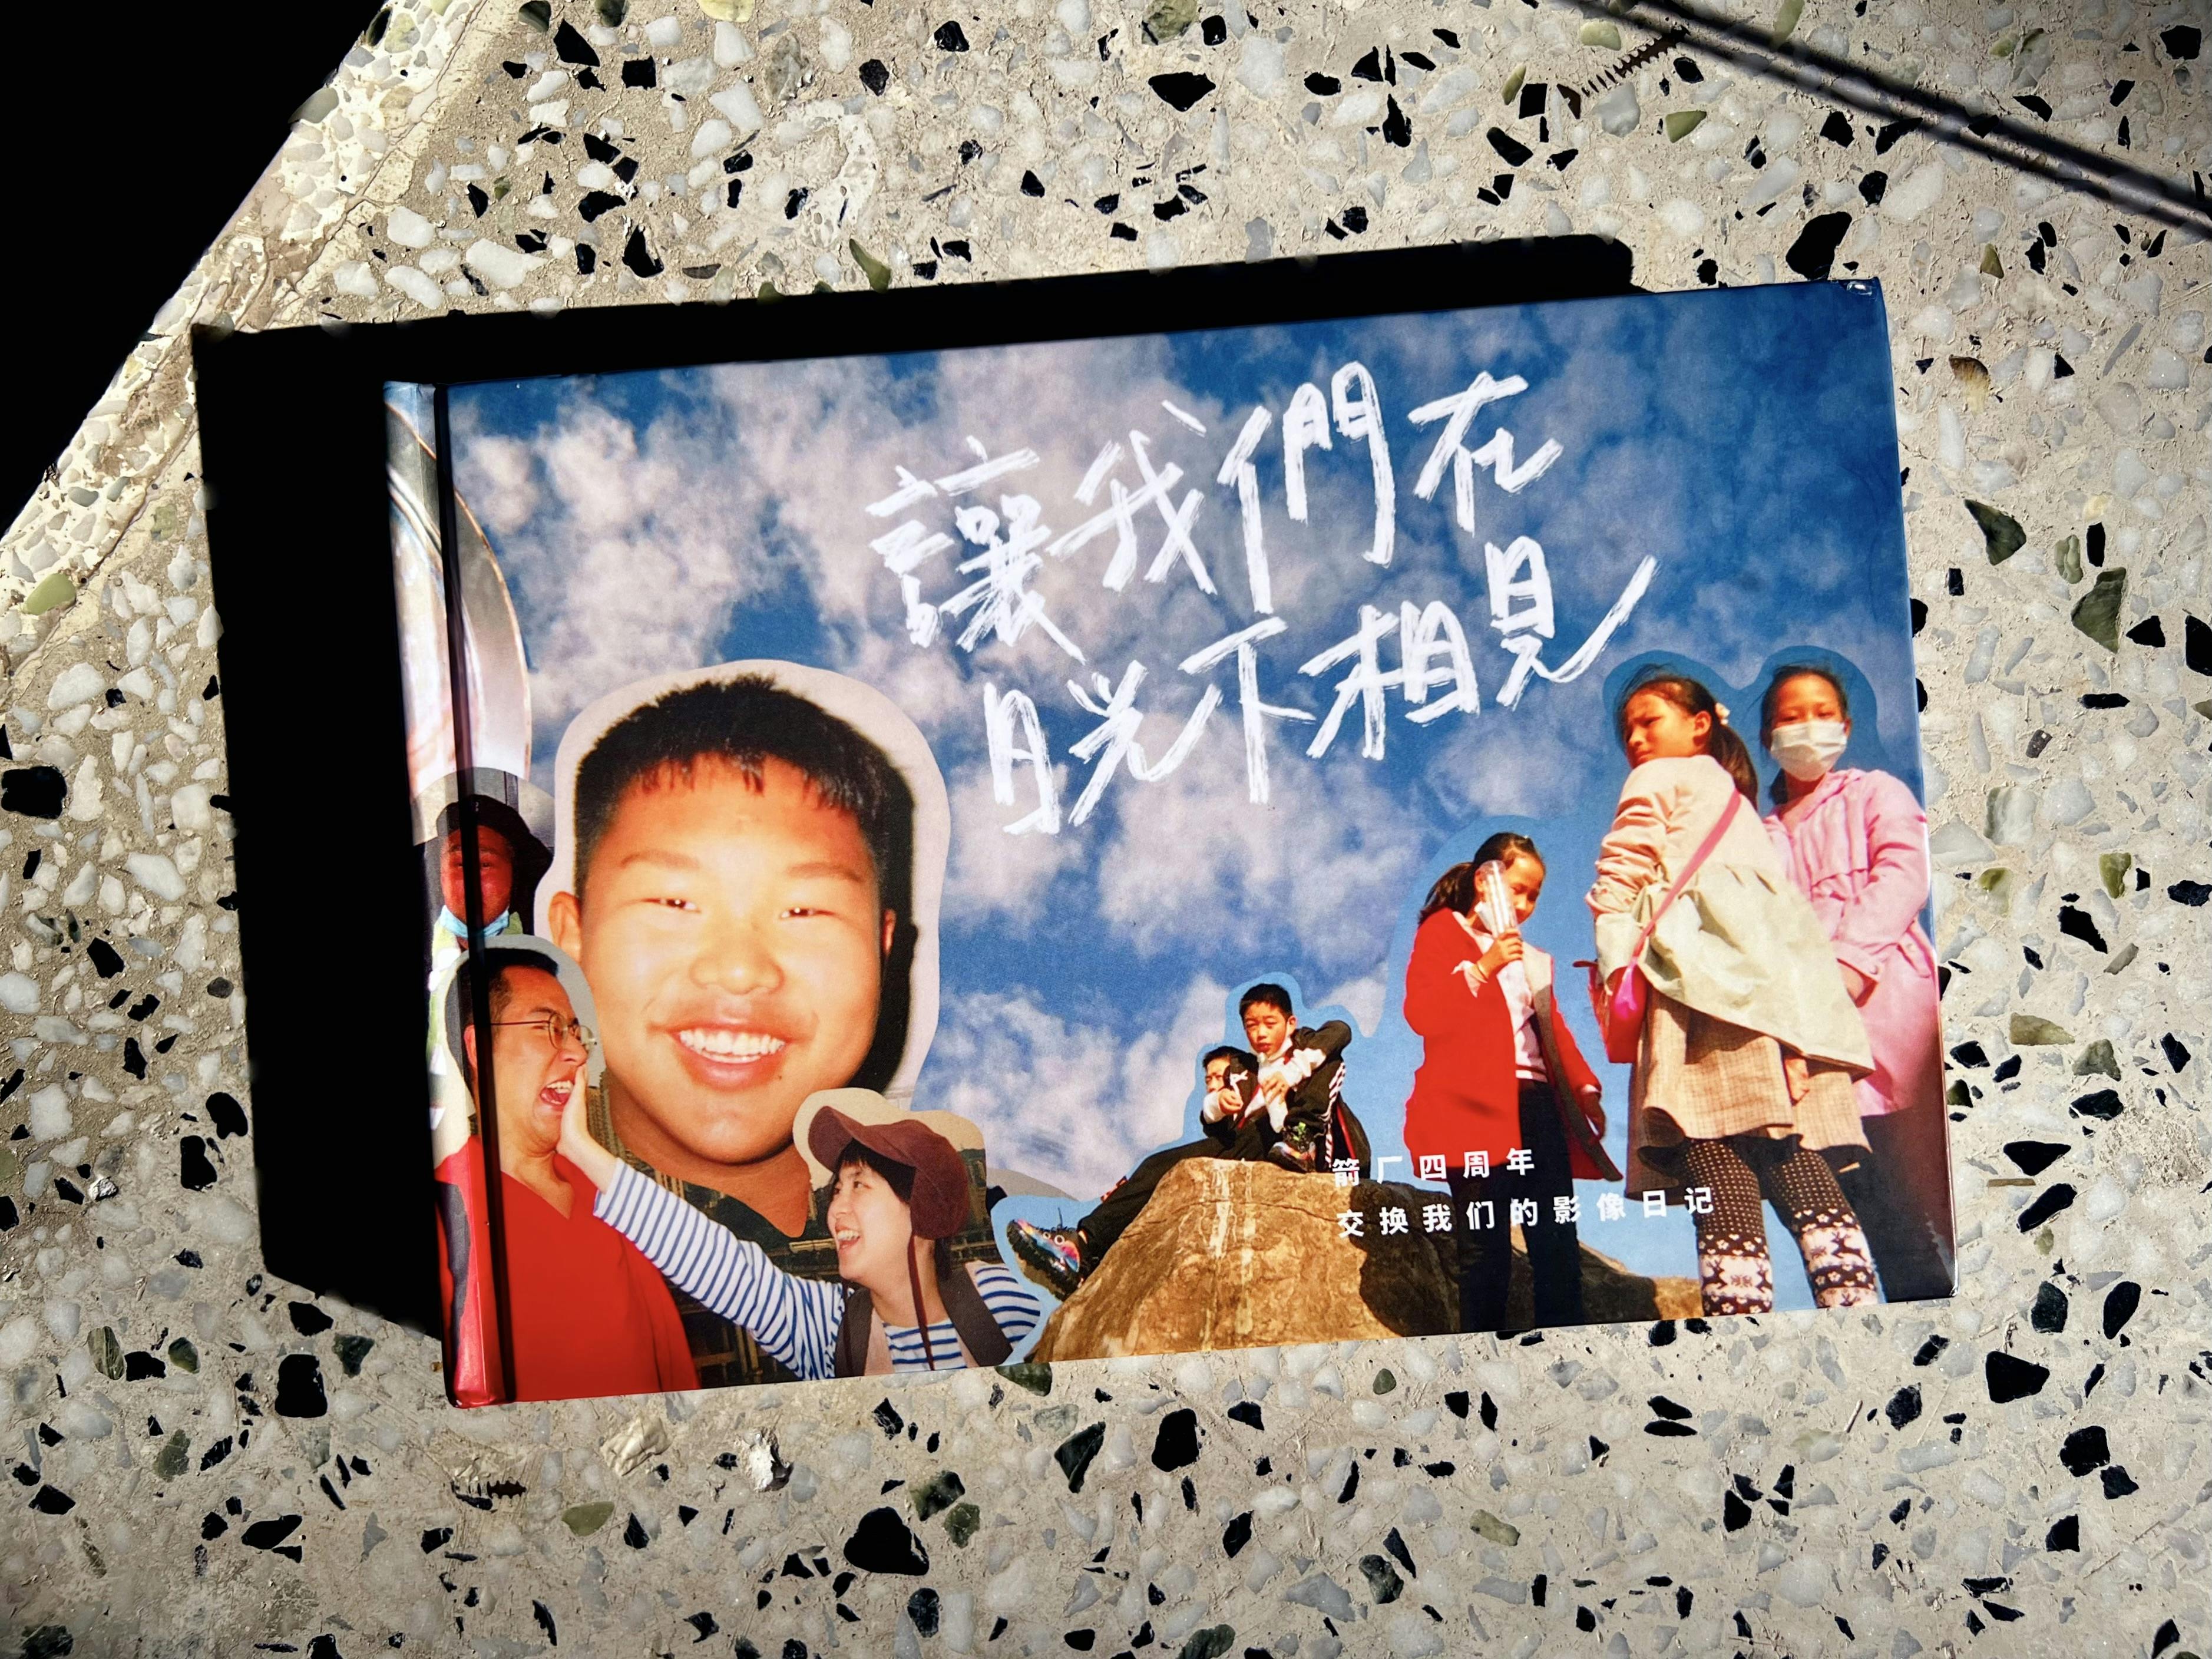 Cover of the photo book.